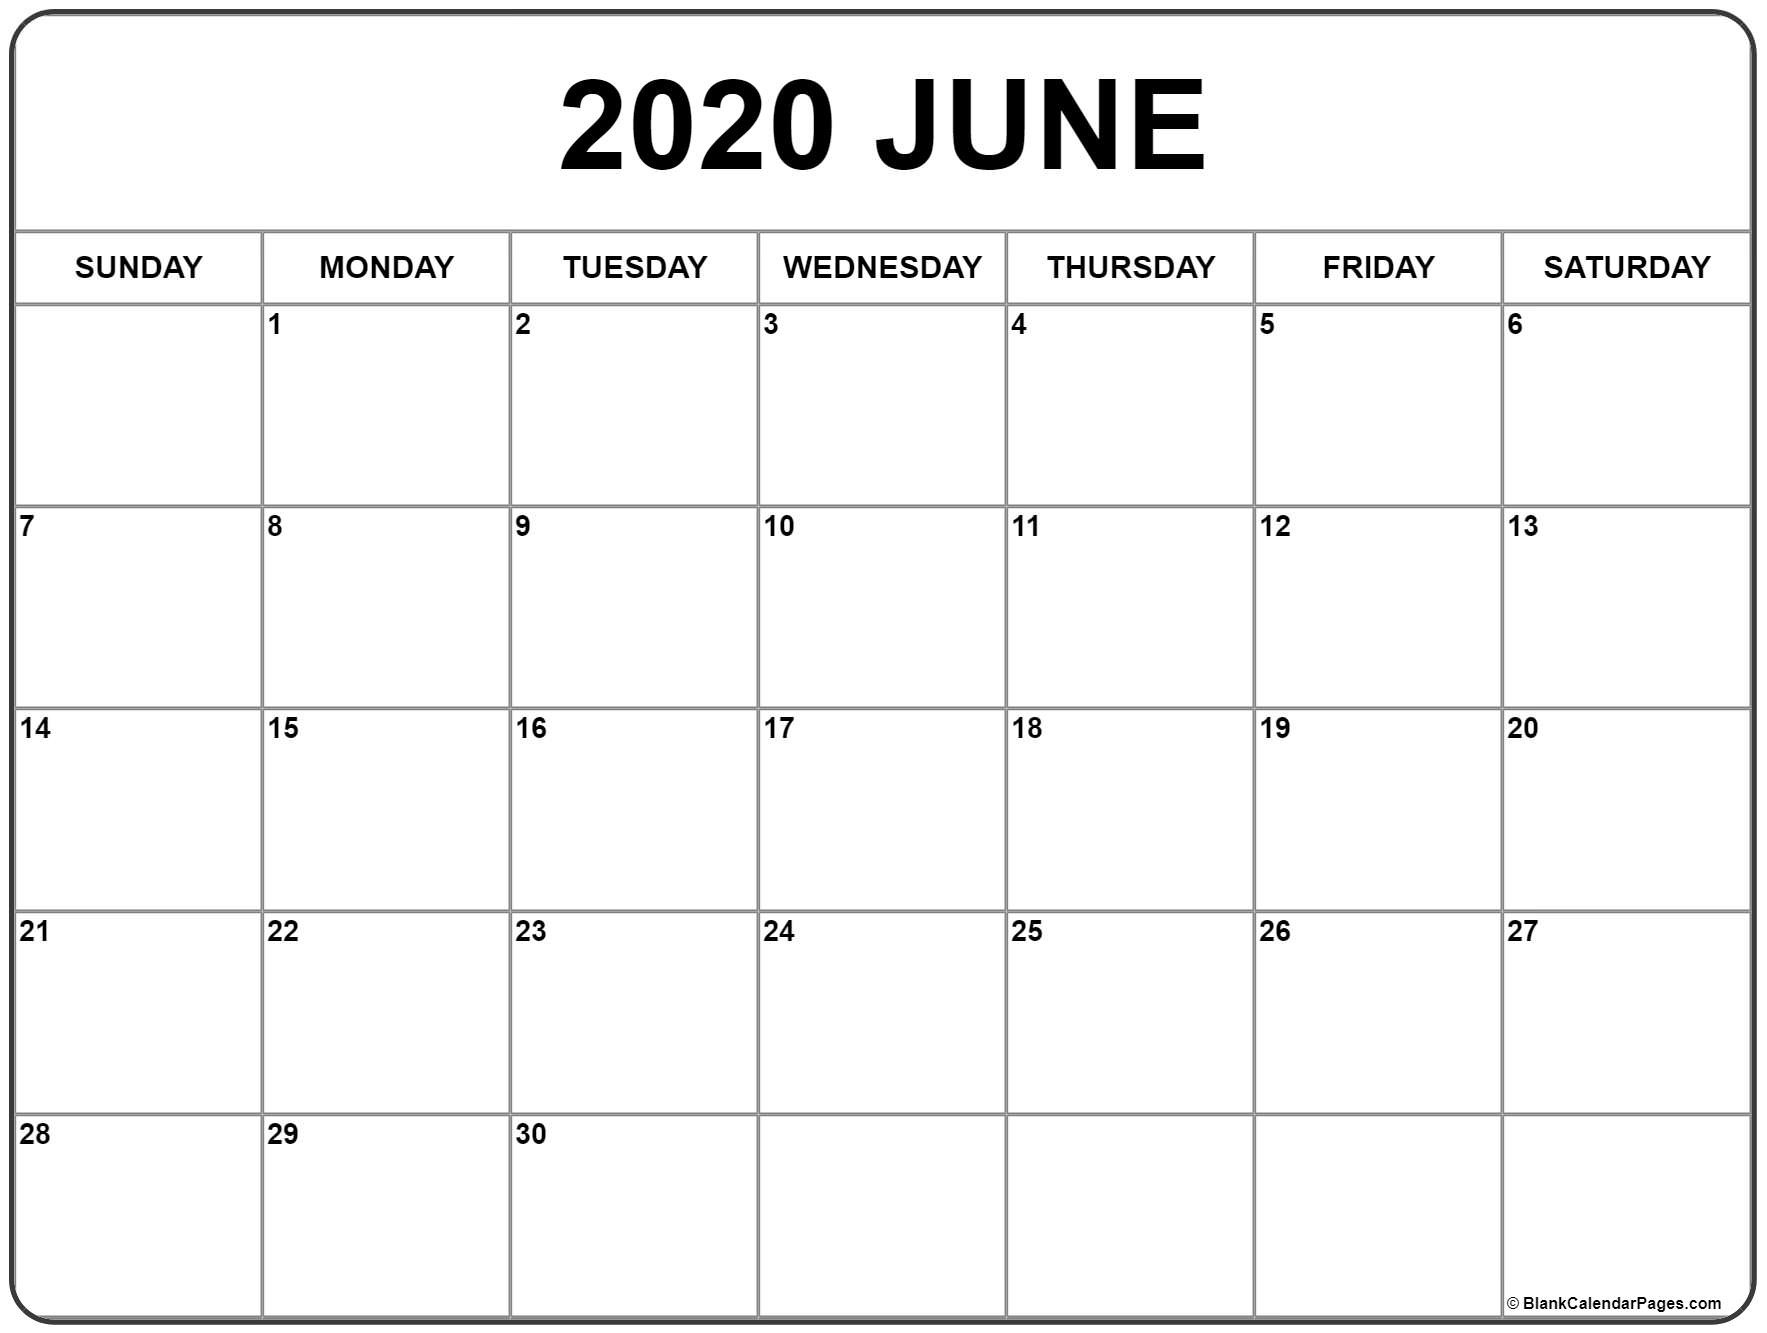 June 2020 Calendar | Free Printable Monthly Calendars-Monthly Calendar Of June And July 2020